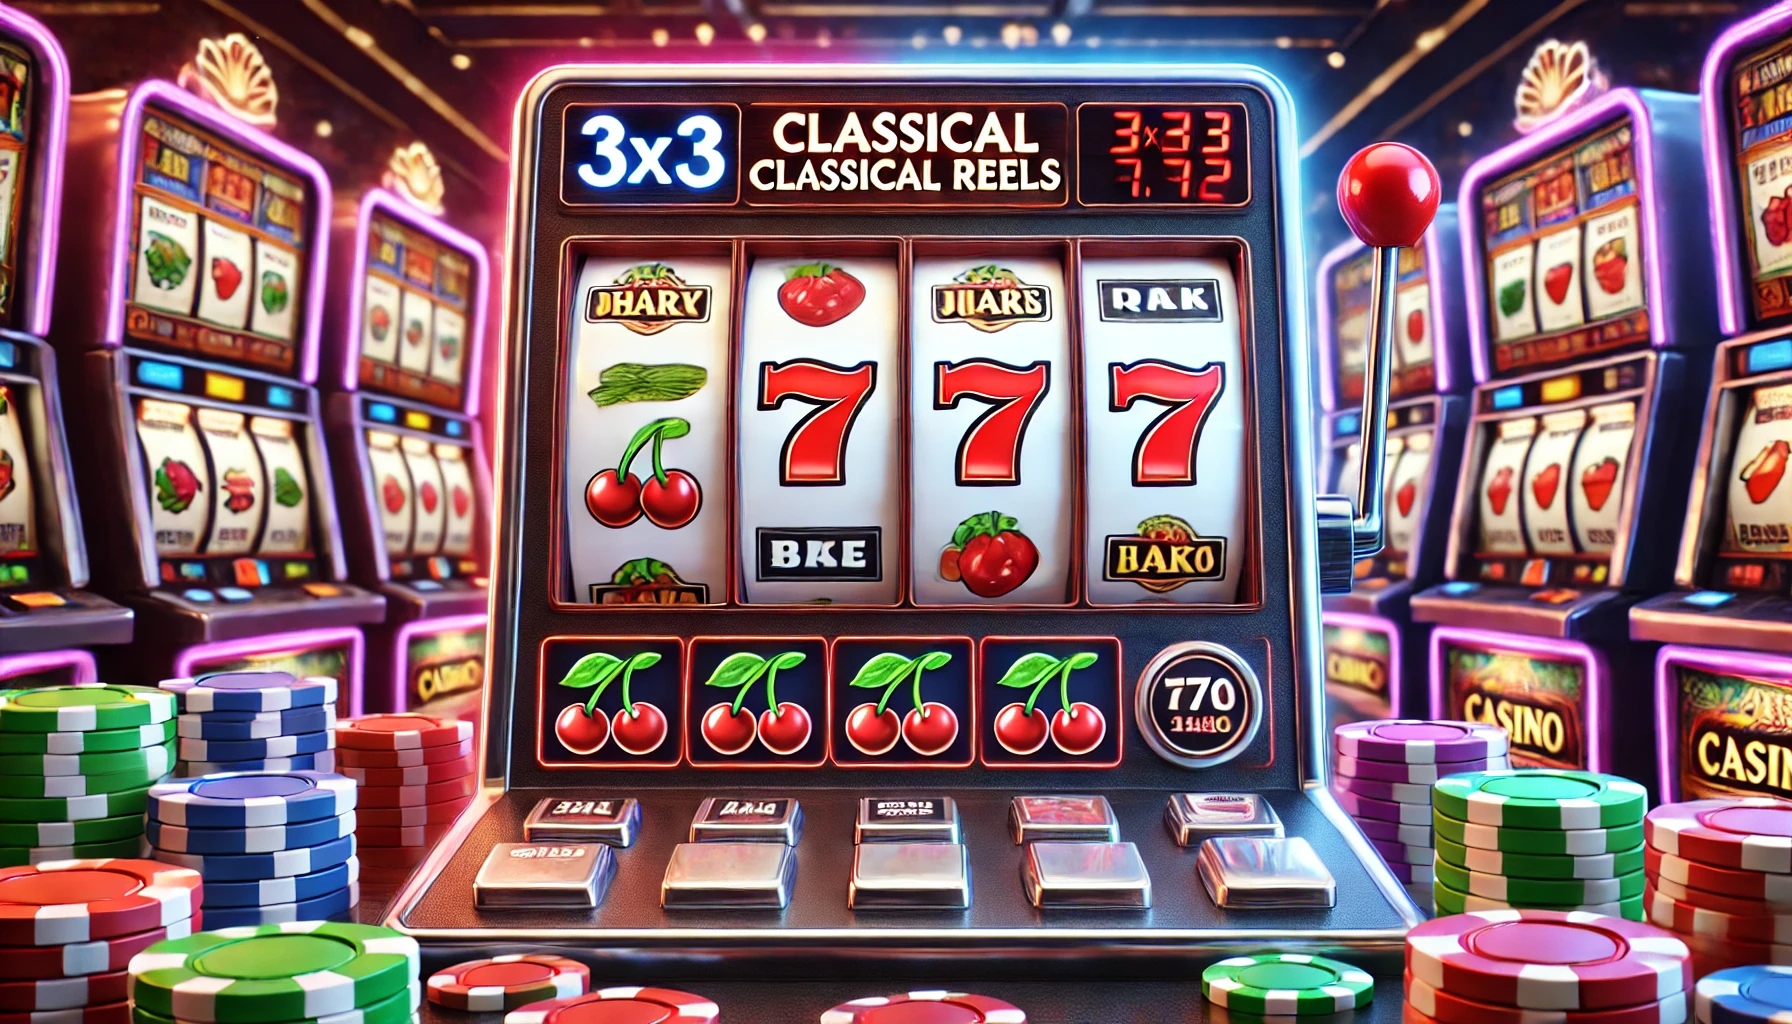 3x3 classical reels slot games in online casino